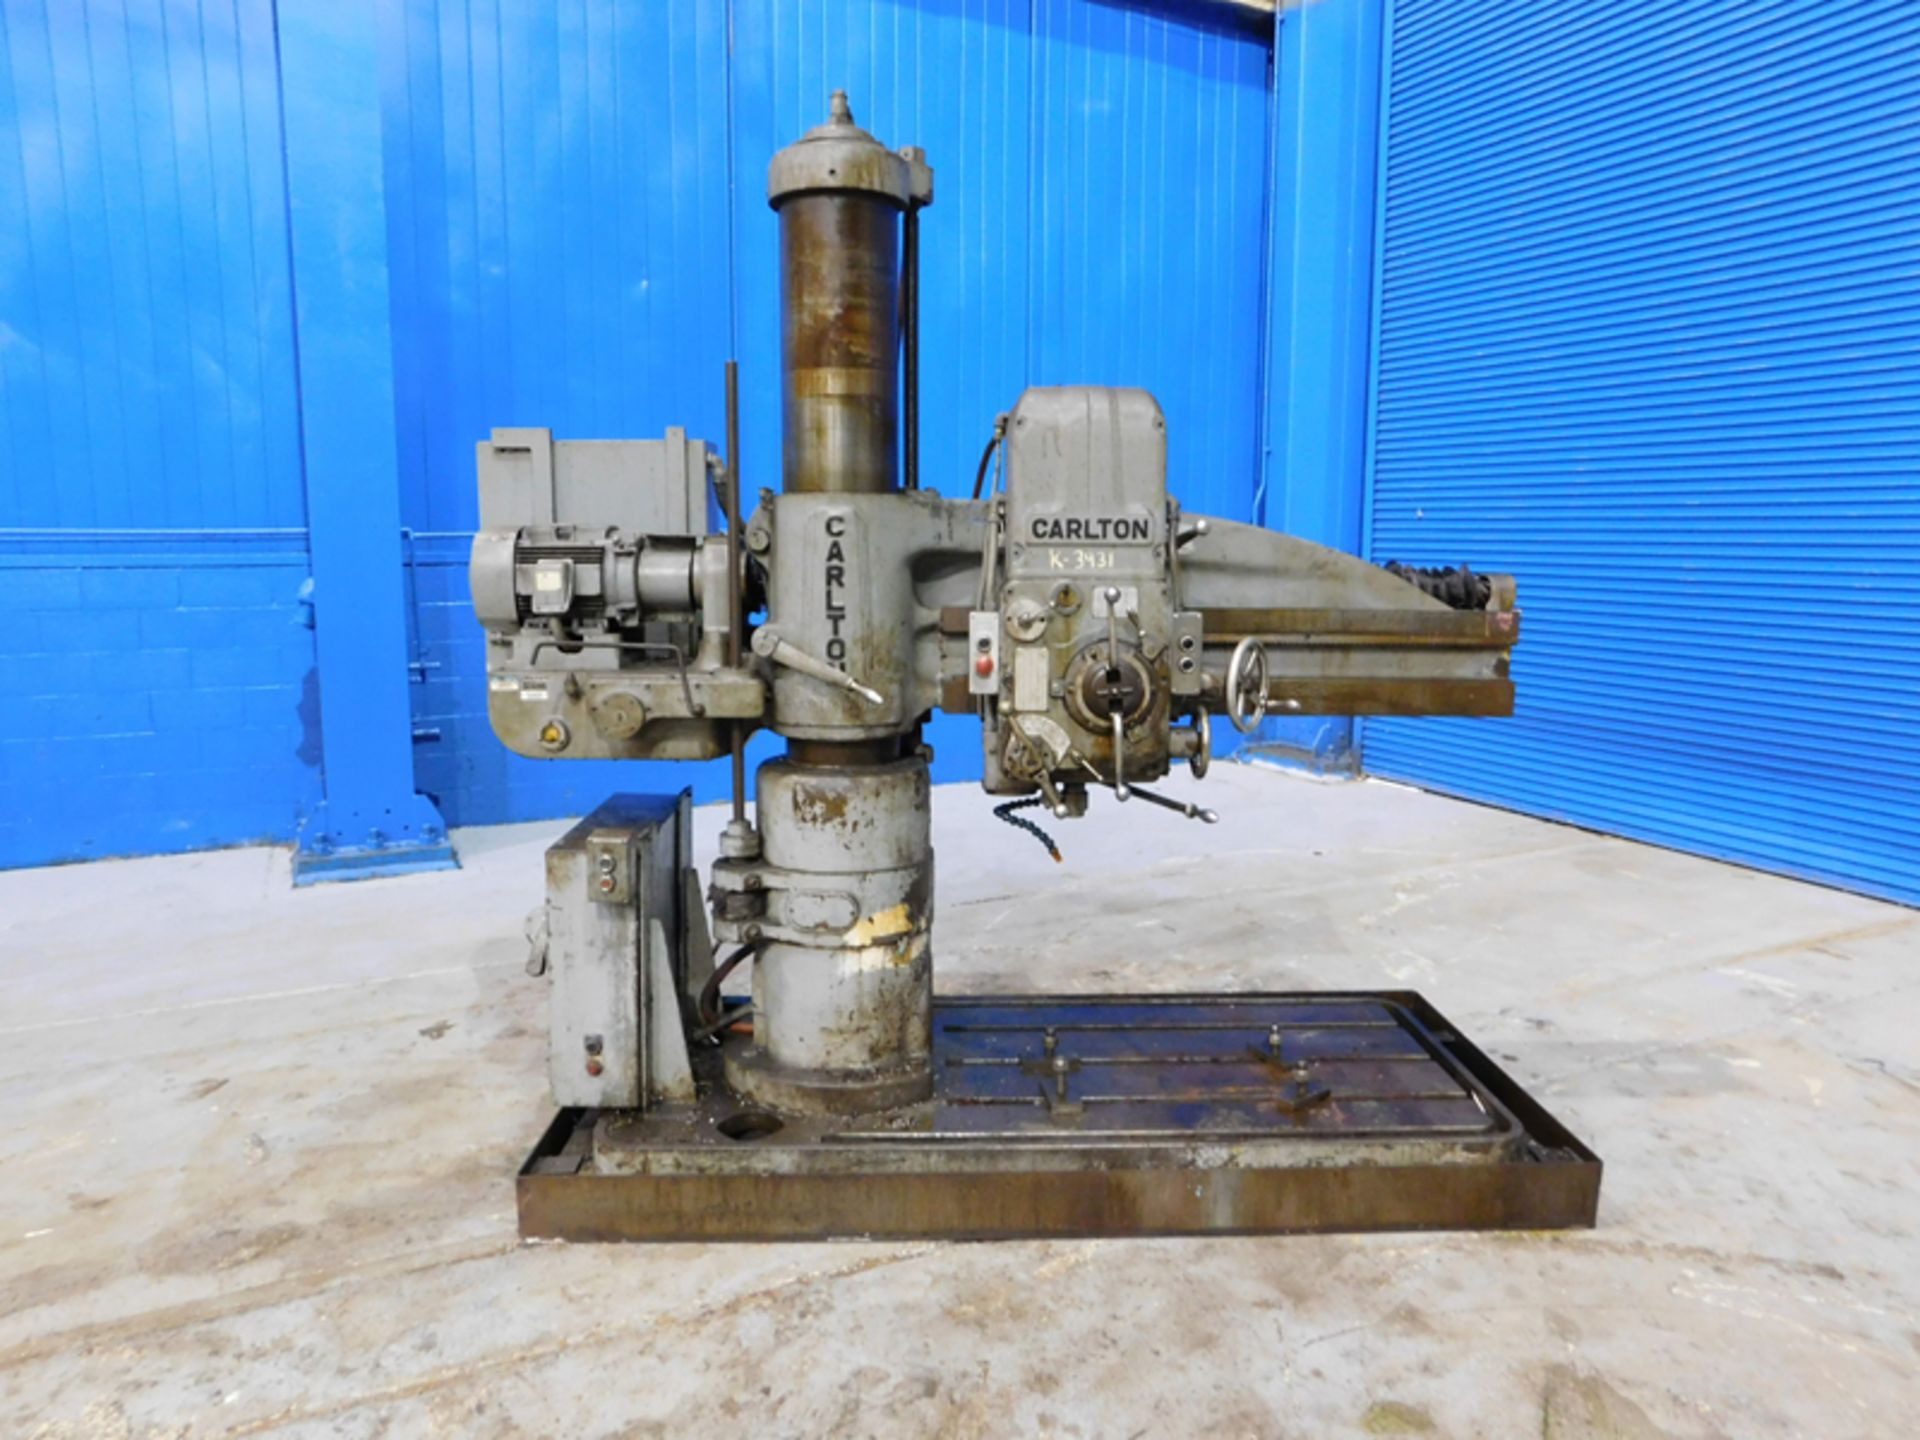 Carlton Radial Arm Drill | 4' x 9", Mdl: 1A, S/N: 4308, Located In: Painesville, OH